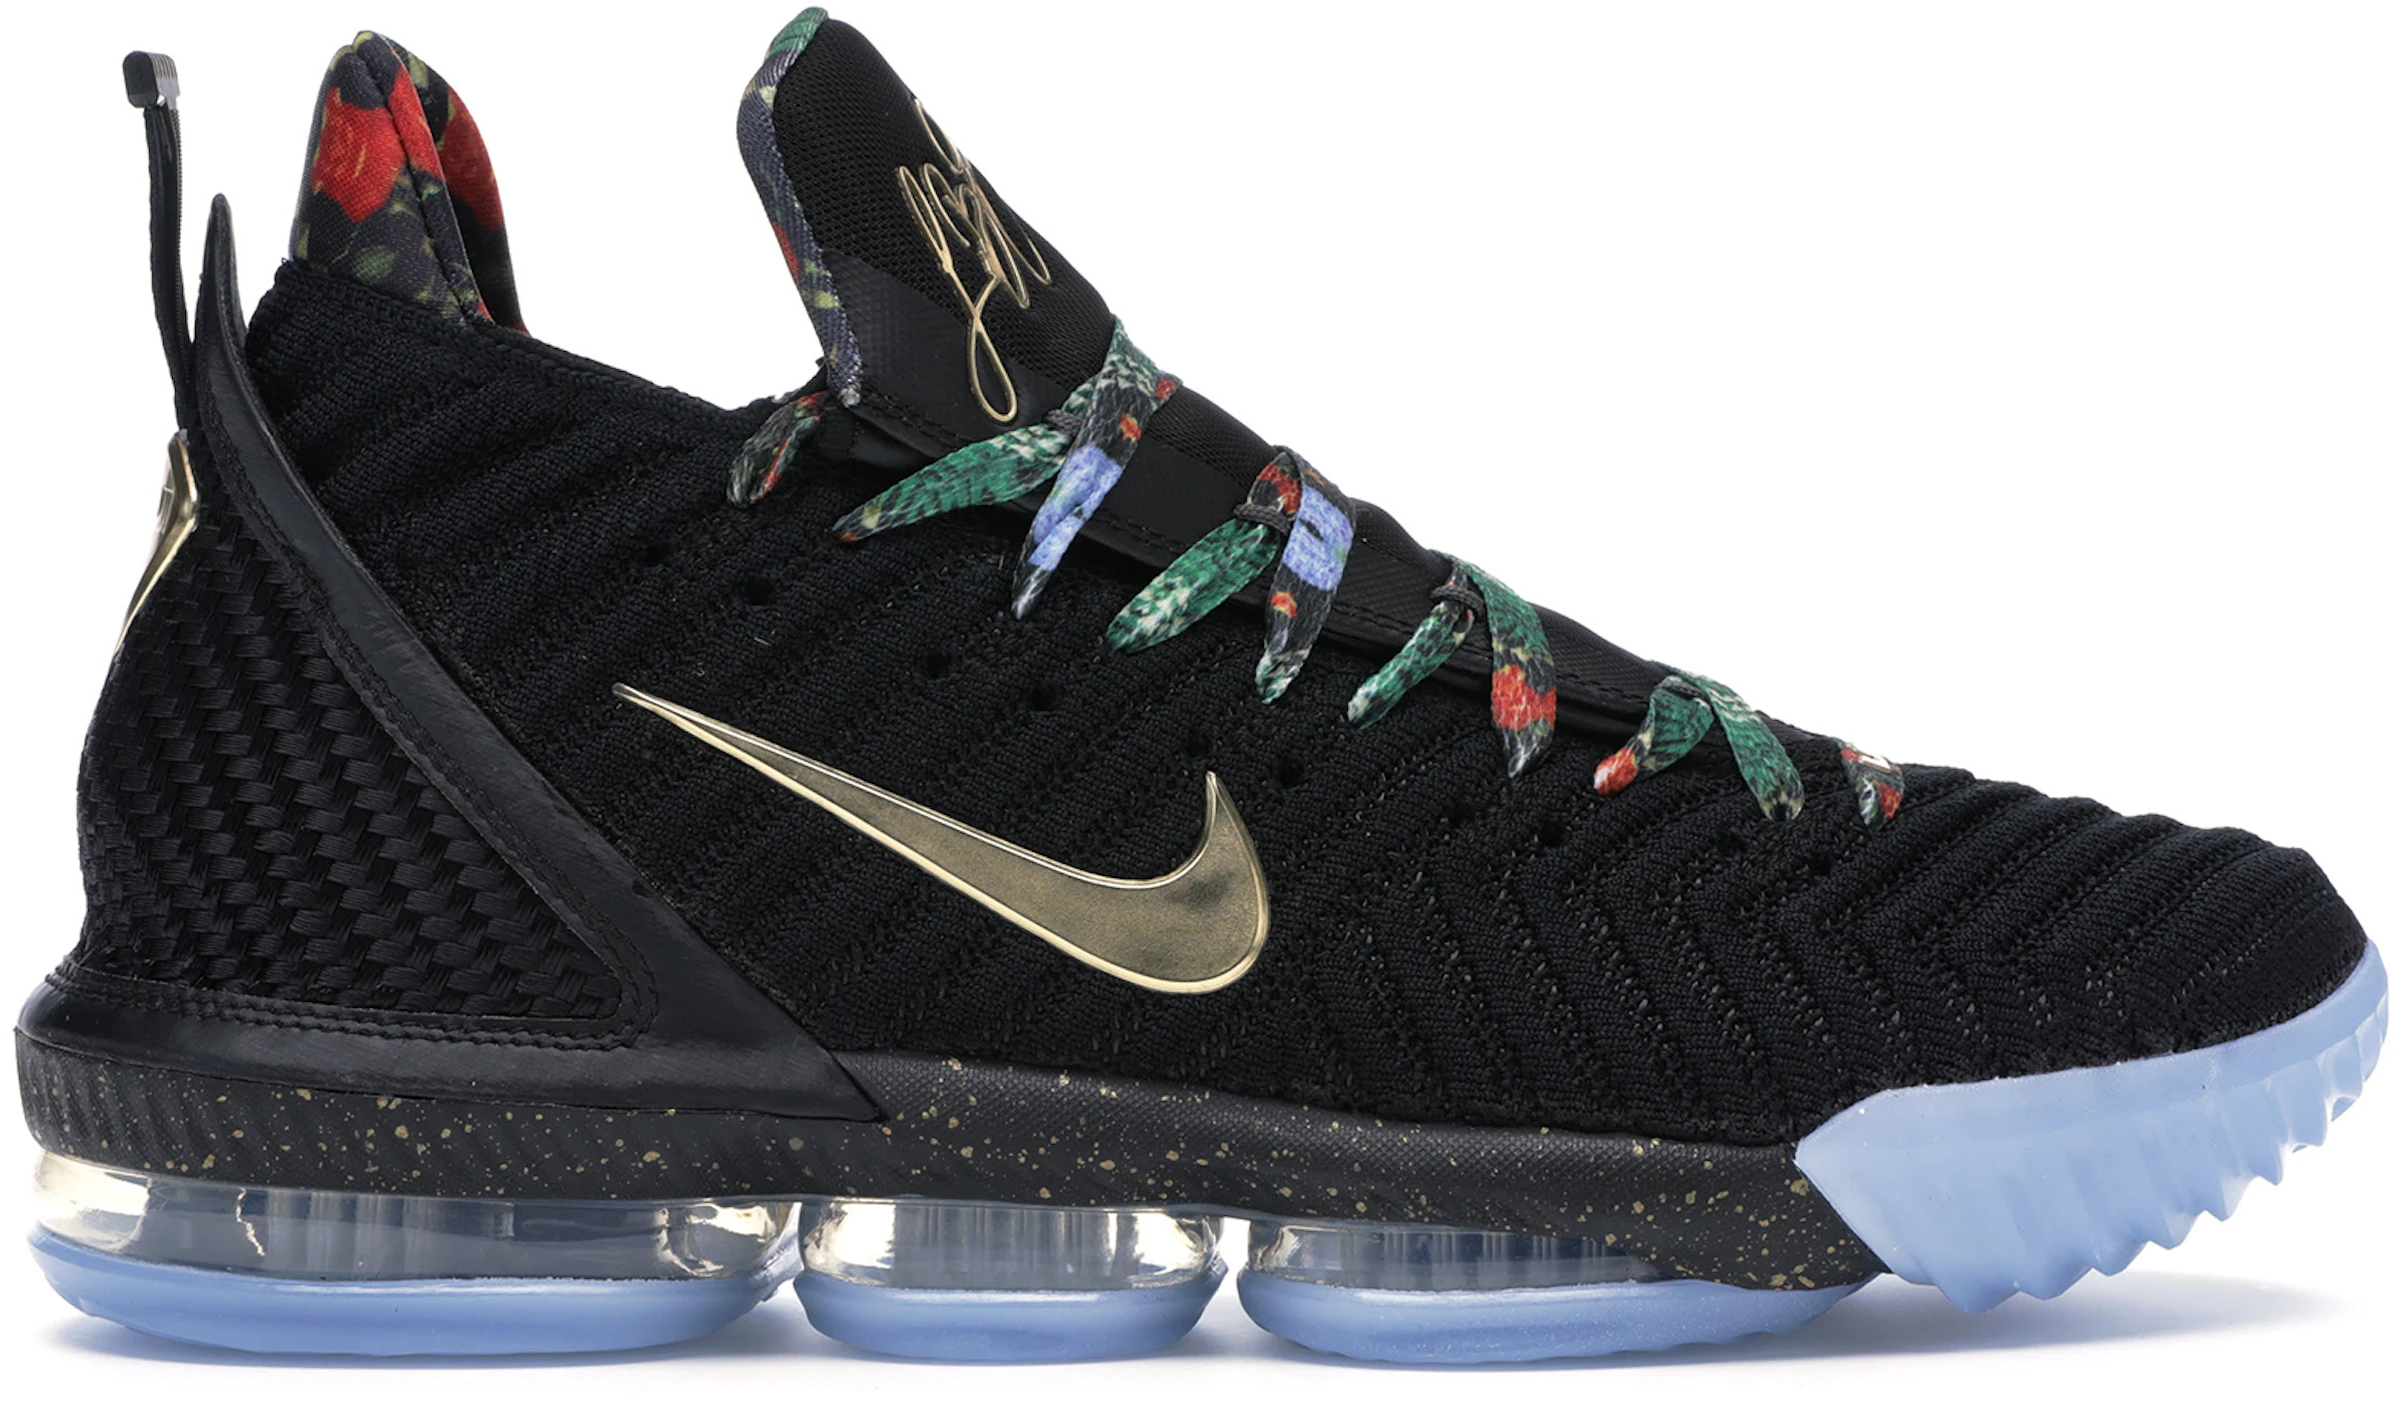 Lebron All Sizes & Colorways at